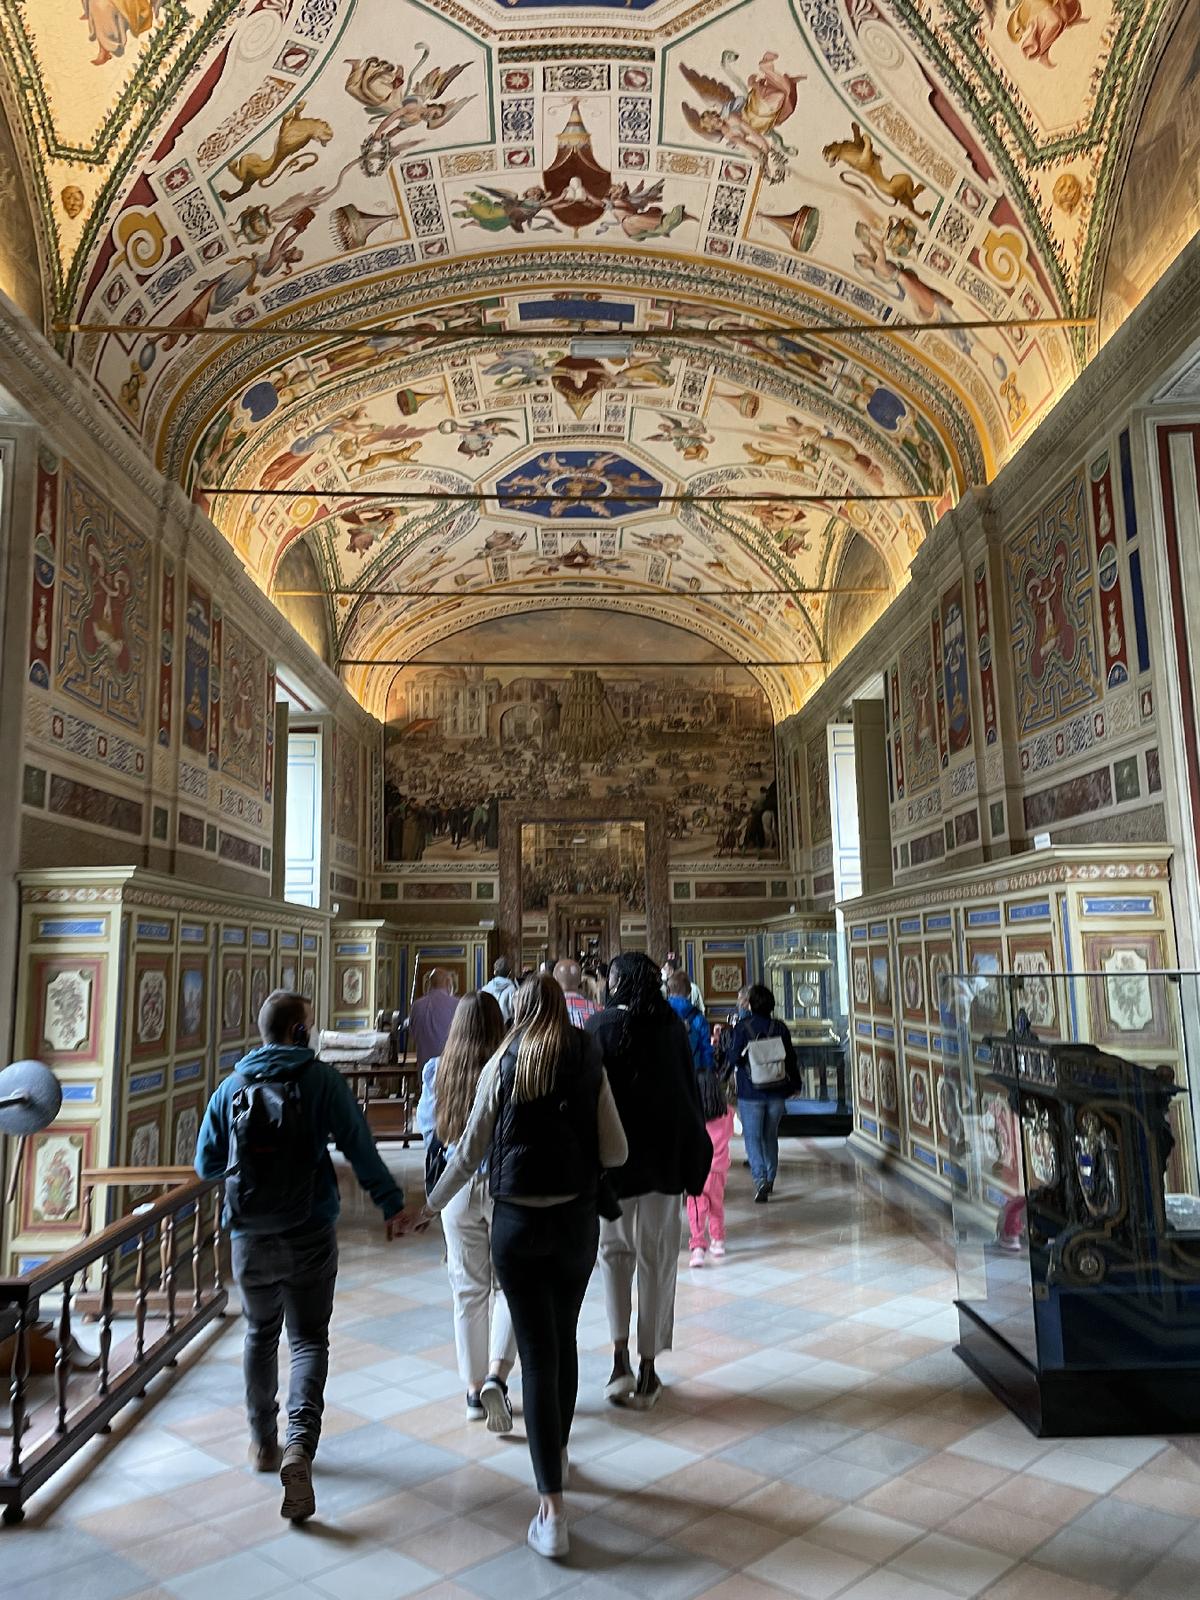 Crowds press through some of the Vatican Museum's nine miles of masterpiece-filled galleries. (Photo courtesy of Lesley Sauls Frederikson)